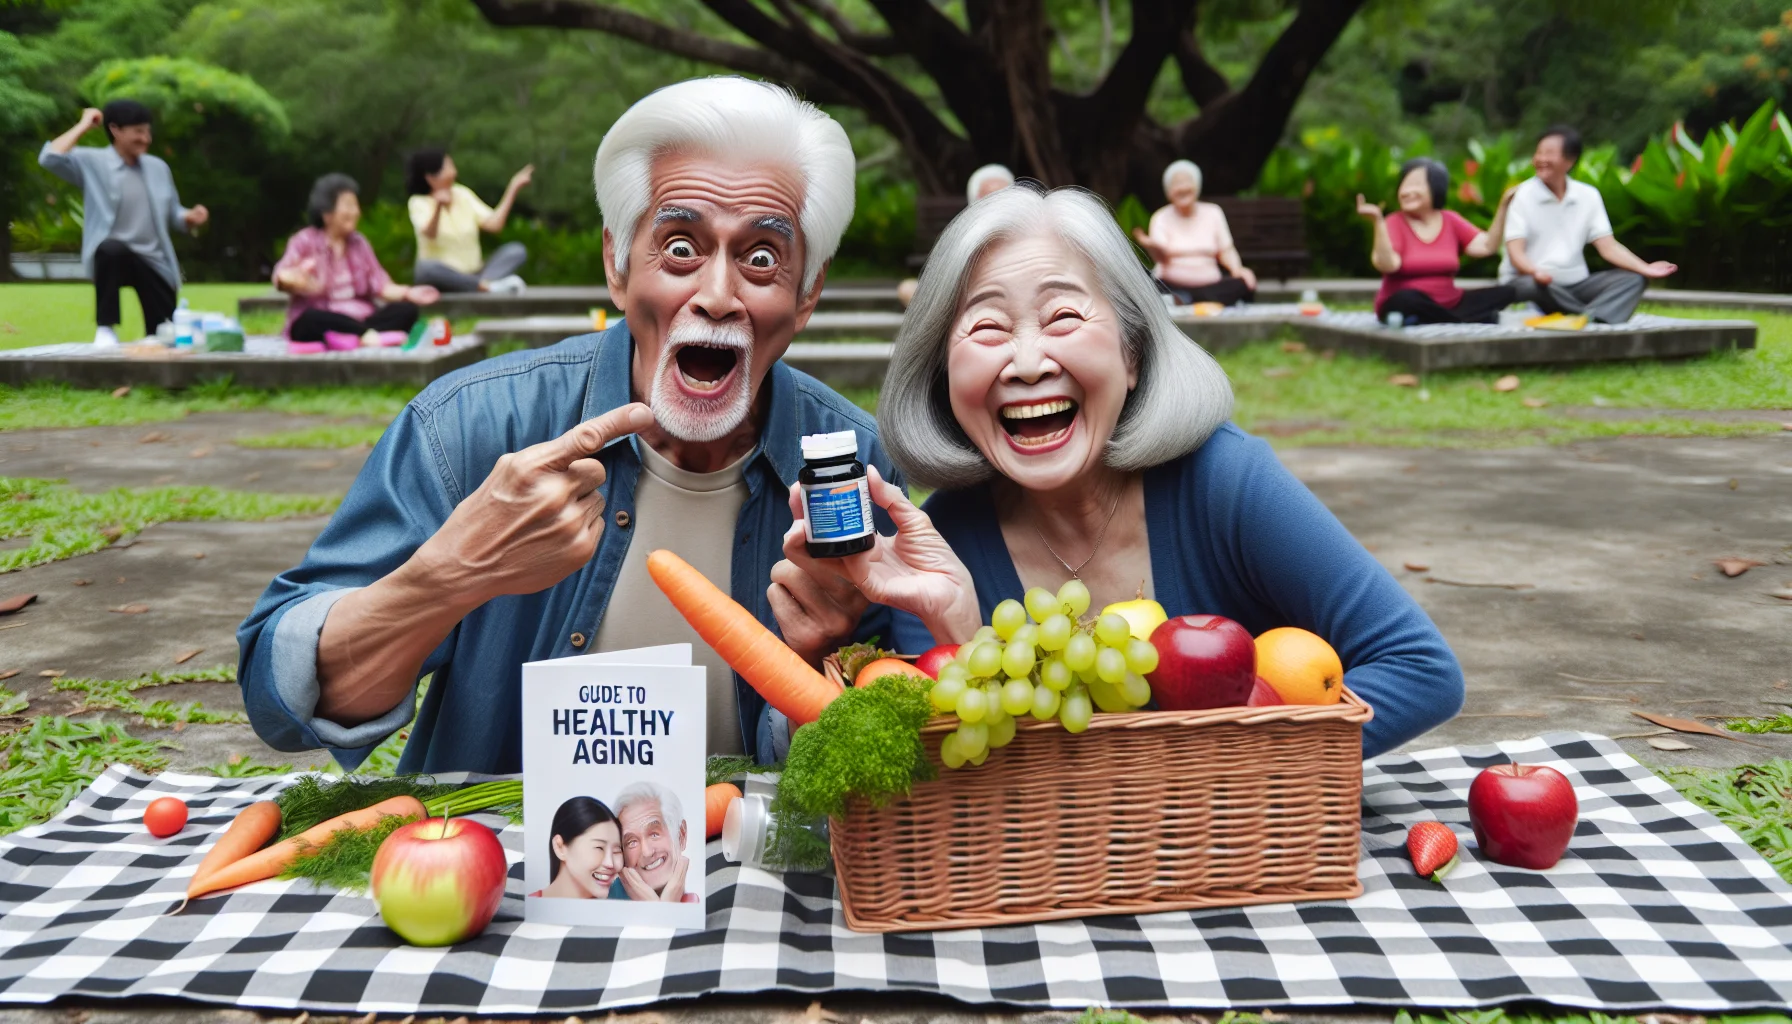 Please generate a humorous and realistic image of a lively elderly couple enjoying a picnic in the park. The Caucasian man holds a bottle of skin supplements, pointing to it humorously while having an exaggerated look of surprise on his face. The Asian woman is laughing, holding an apple in one hand and a carrot in the other, symbolizing a healthy diet. A brochure titled 'Guide to Healthy Aging' lies on the checkered picnic blanket, and their picnic basket is filled with vibrantly colorful fruits and vegetables. In the background, other elders are seen participating in light exercises and engaging in jovial conversation, exemplifying a healthy lifestyle.